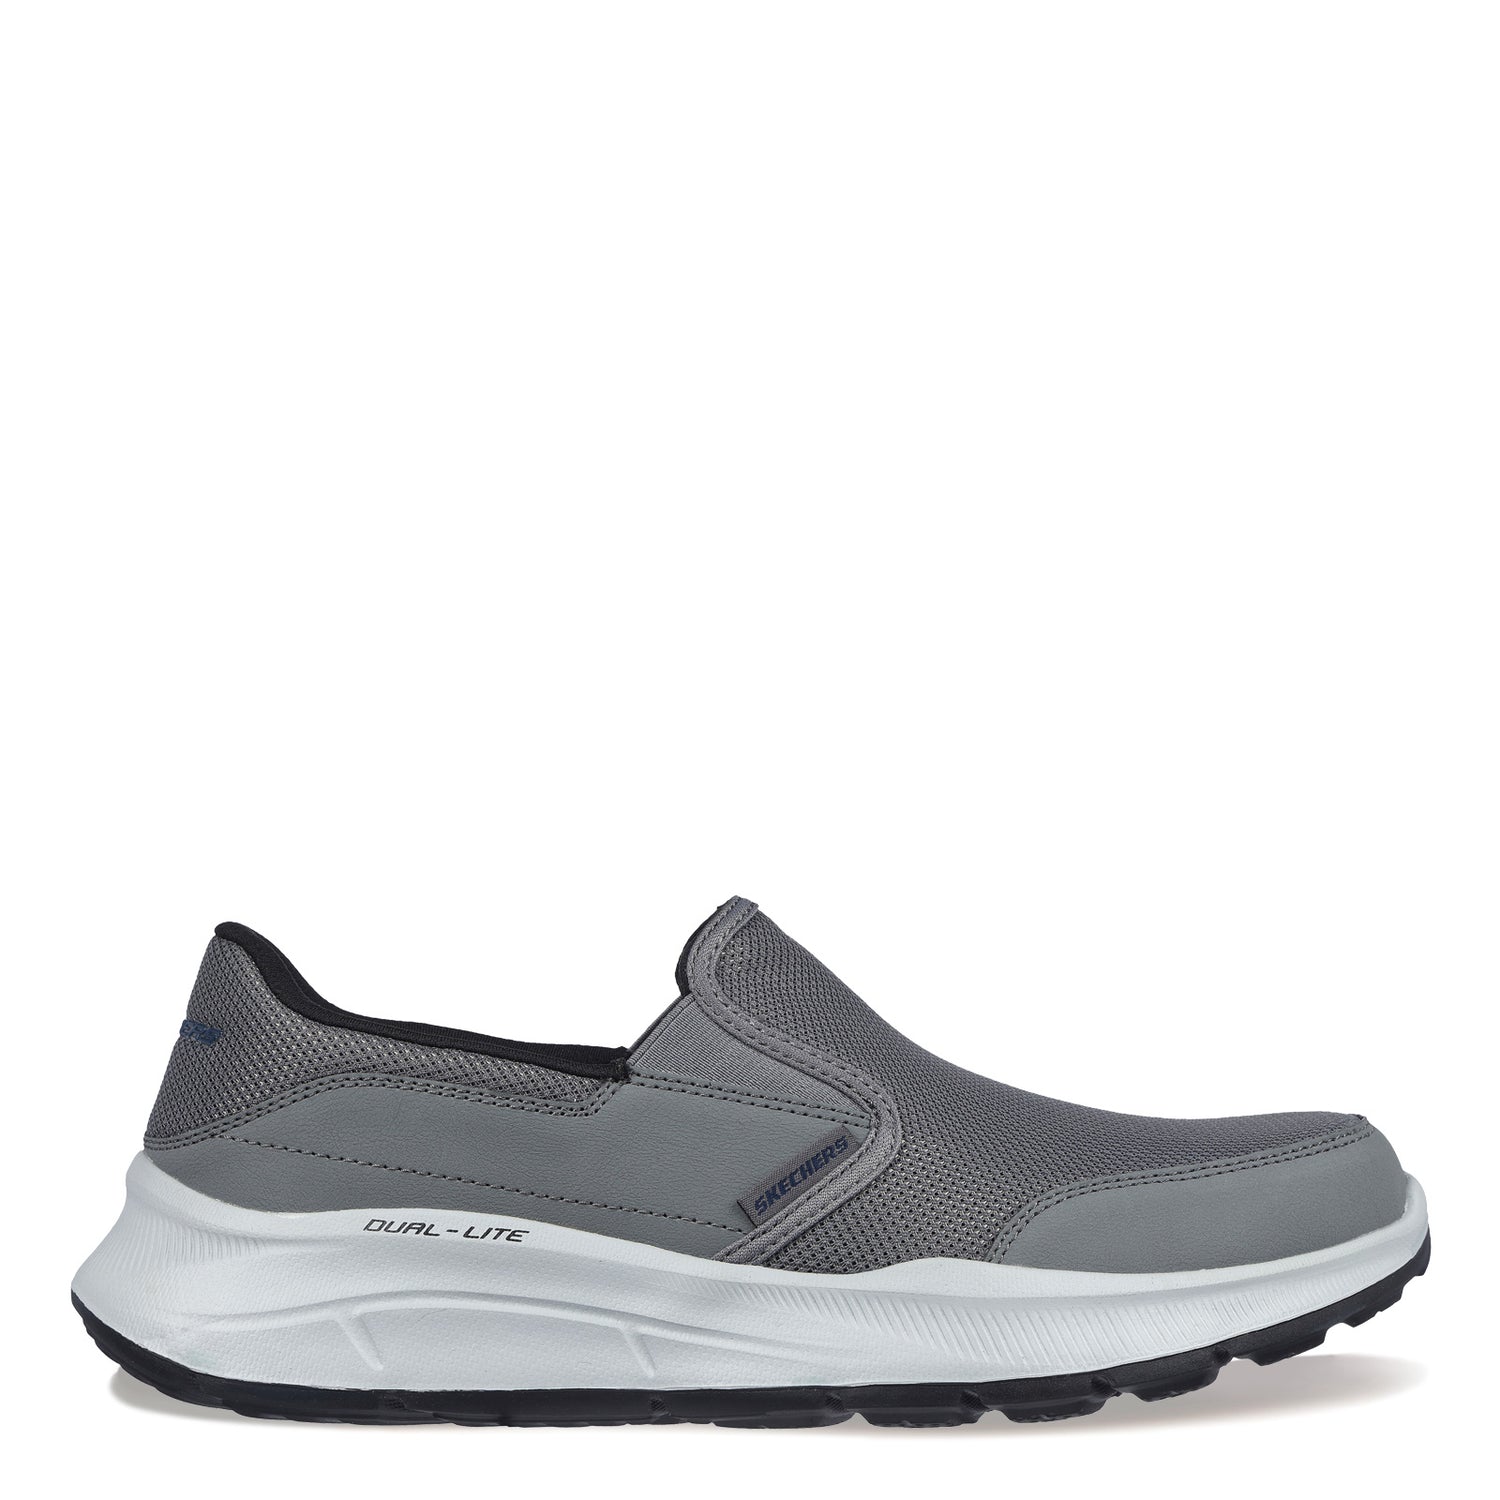 Peltz Shoes  Men's Skechers Relaxed Fit: Equalizer 5.0 - Persistable Sneaker Charcoal 232515-CHAR